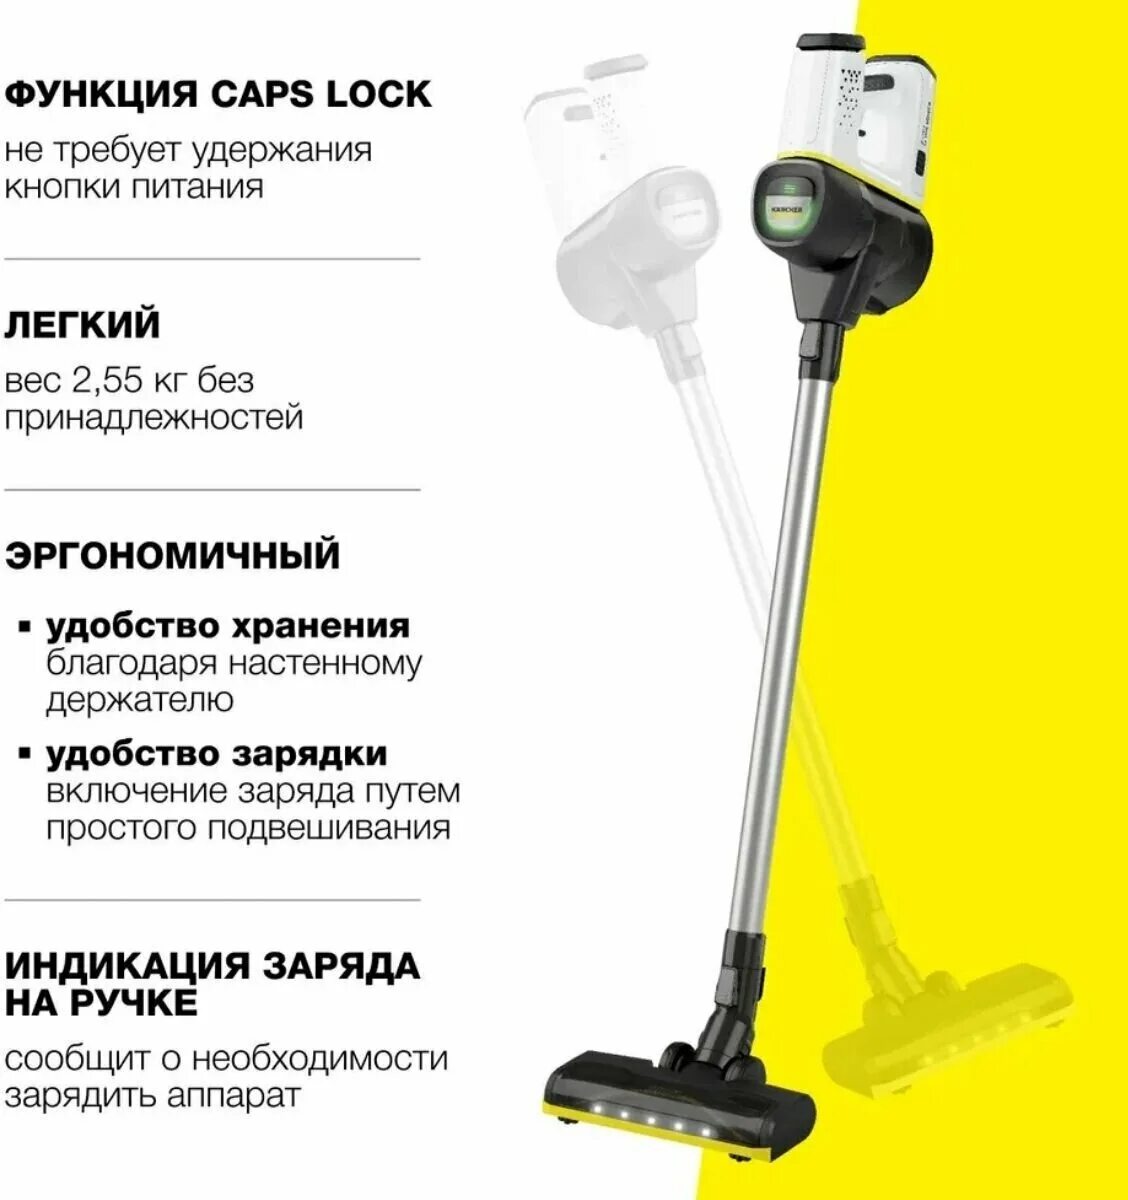 Vc 6 cordless ourfamily pet. Керхер vc6. Karcher vc6 Cordless. Karcher FC 7 Cordless. VC 6 Cordless Premium ourfamily.